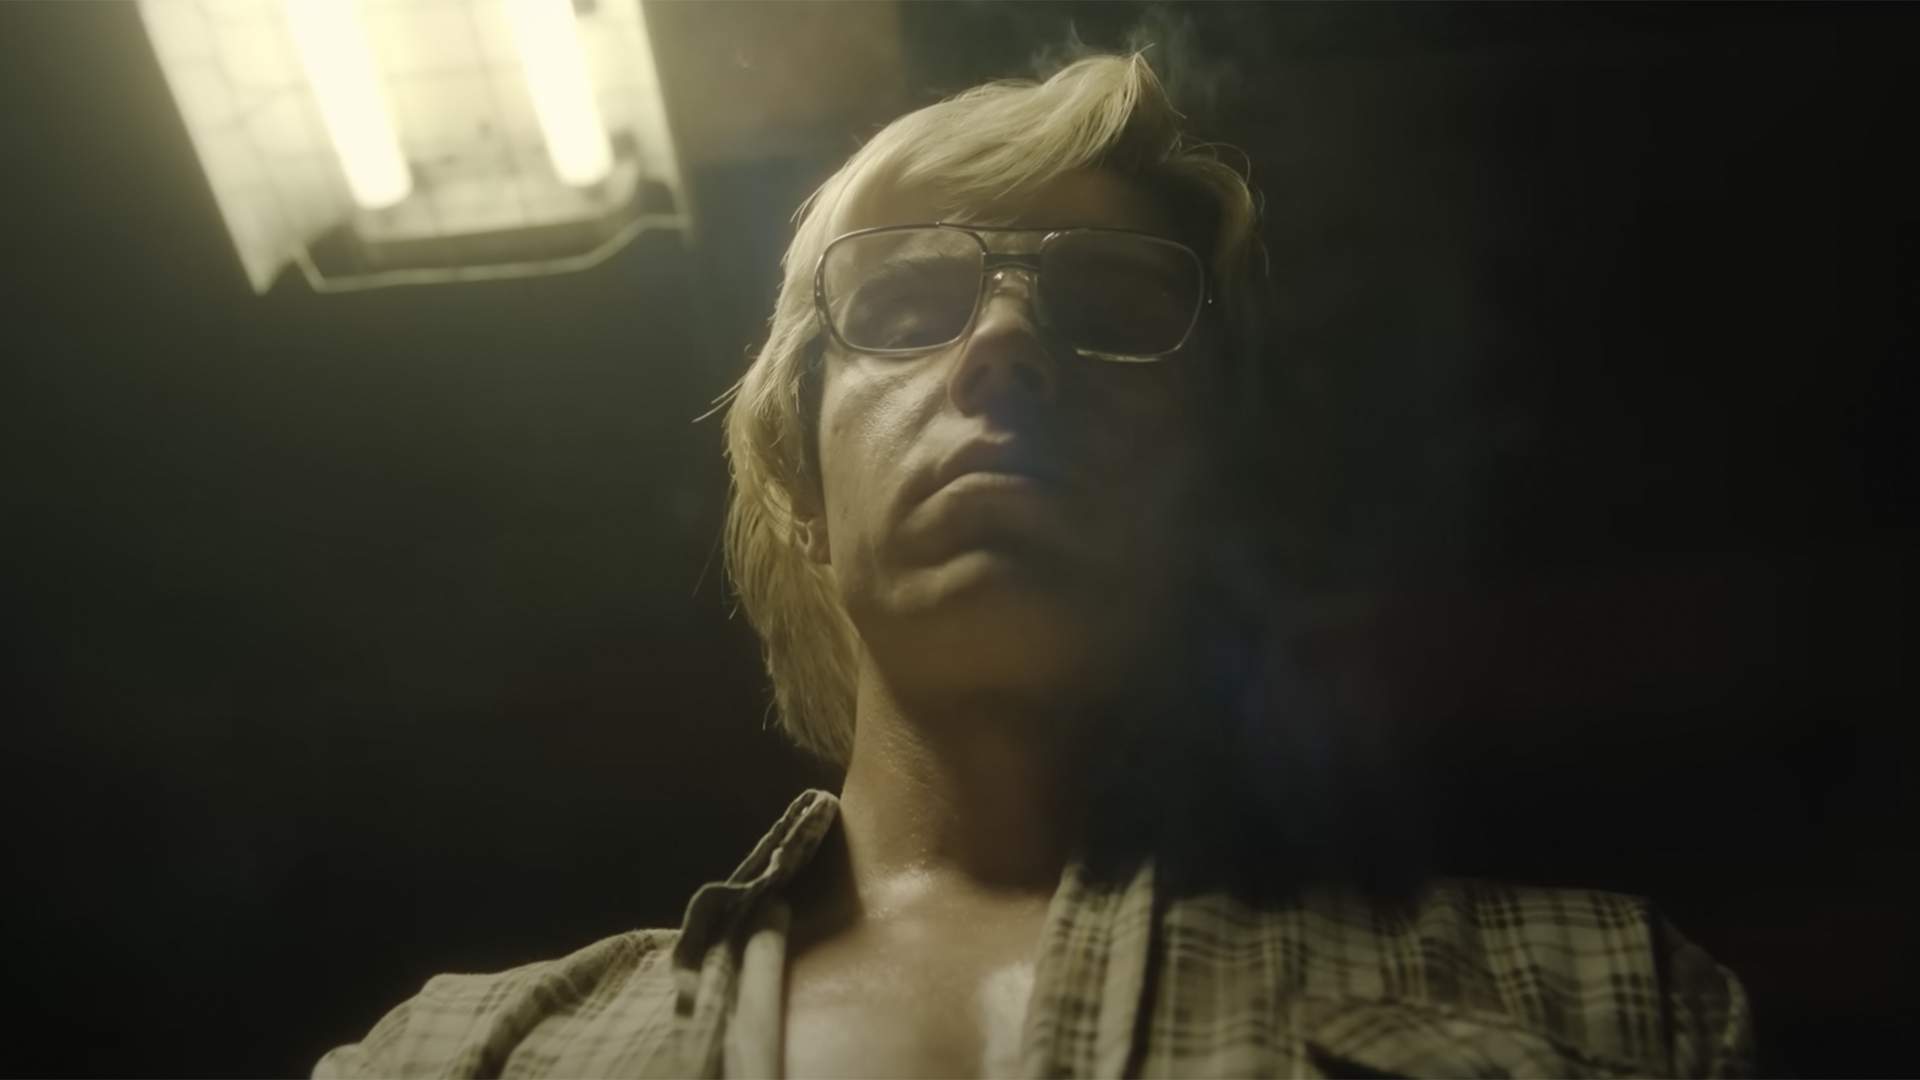 Evan Peters Transforms Into Jeffrey Dahmer in the Unsettling Trailer for Netflix Miniseries 'Monster'